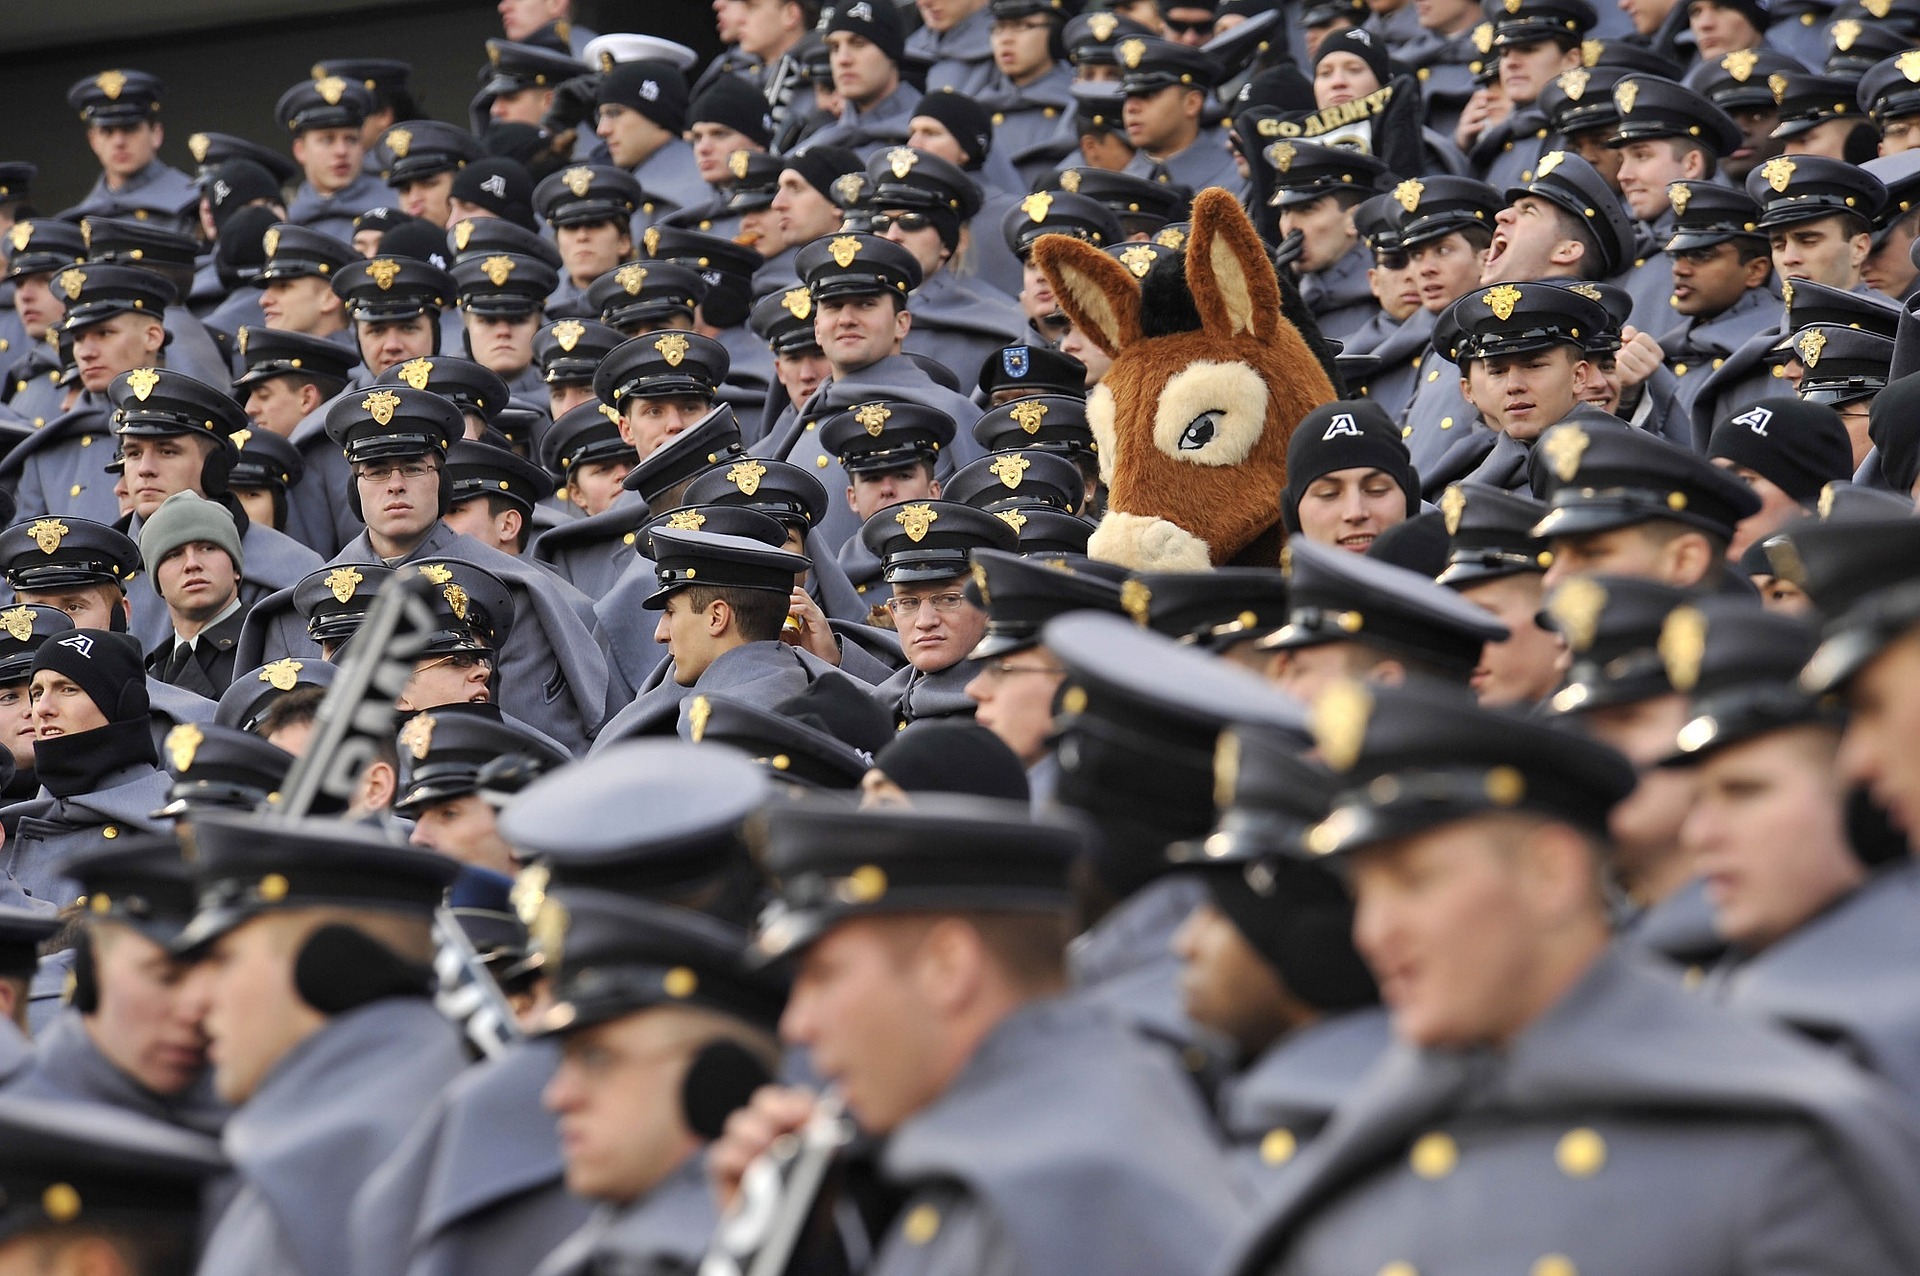 crowd of identically uniformed military personnel and one person in donkey costume in the middle